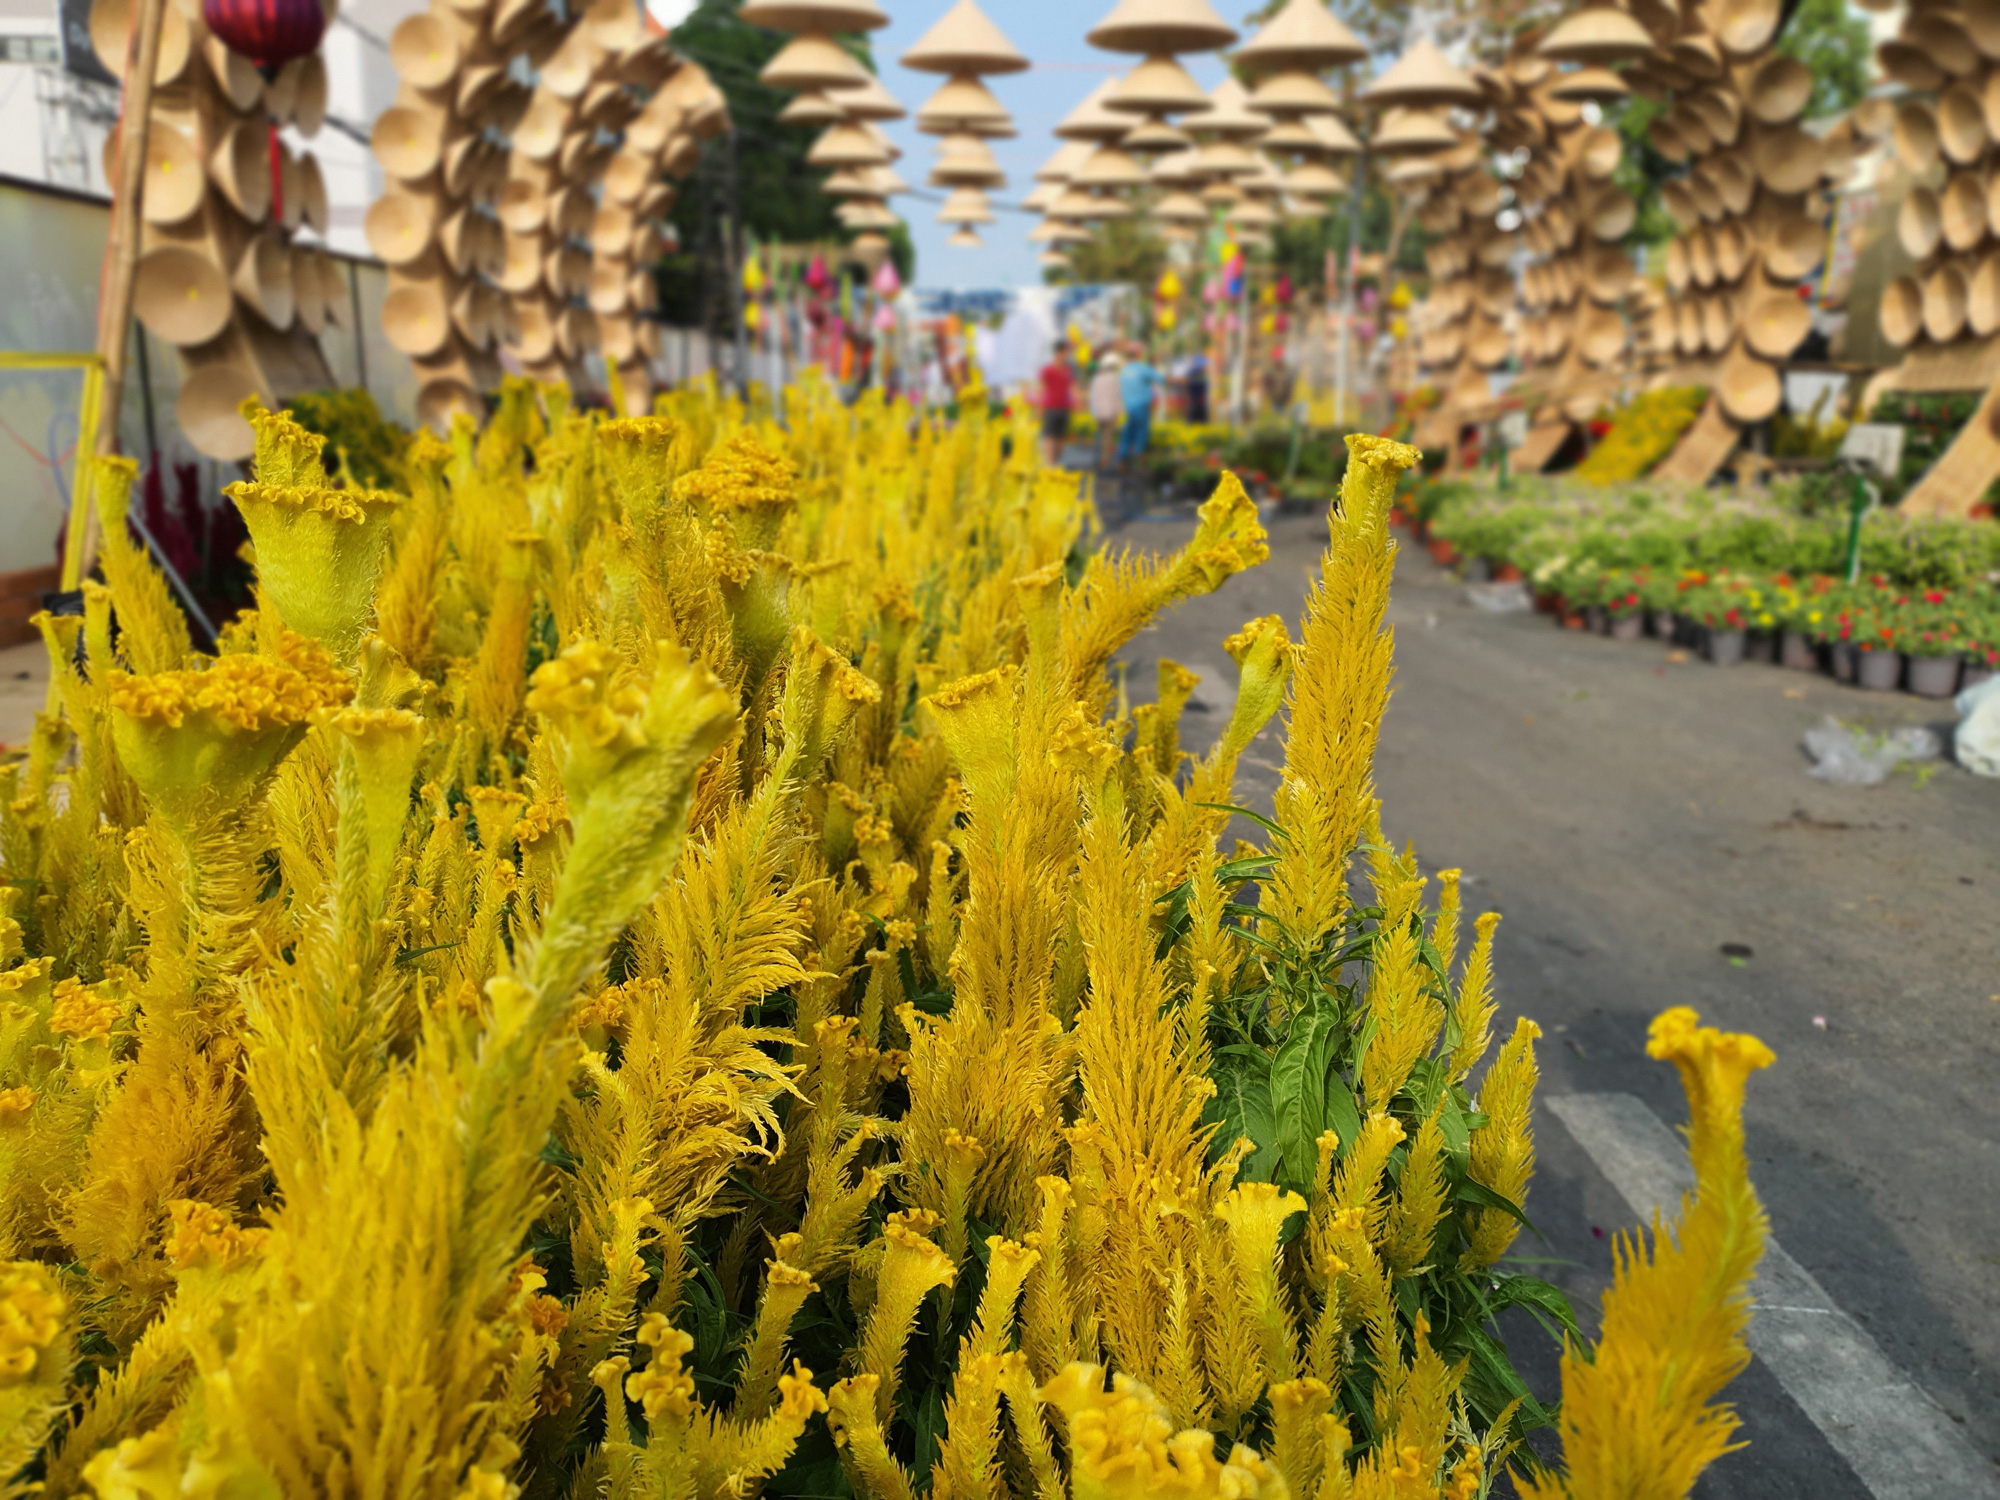 The 2020 Can Tho Flower Street is being assembled in Can Tho City, Vietnam. Photo: Chi Quoc / Tuoi Tre